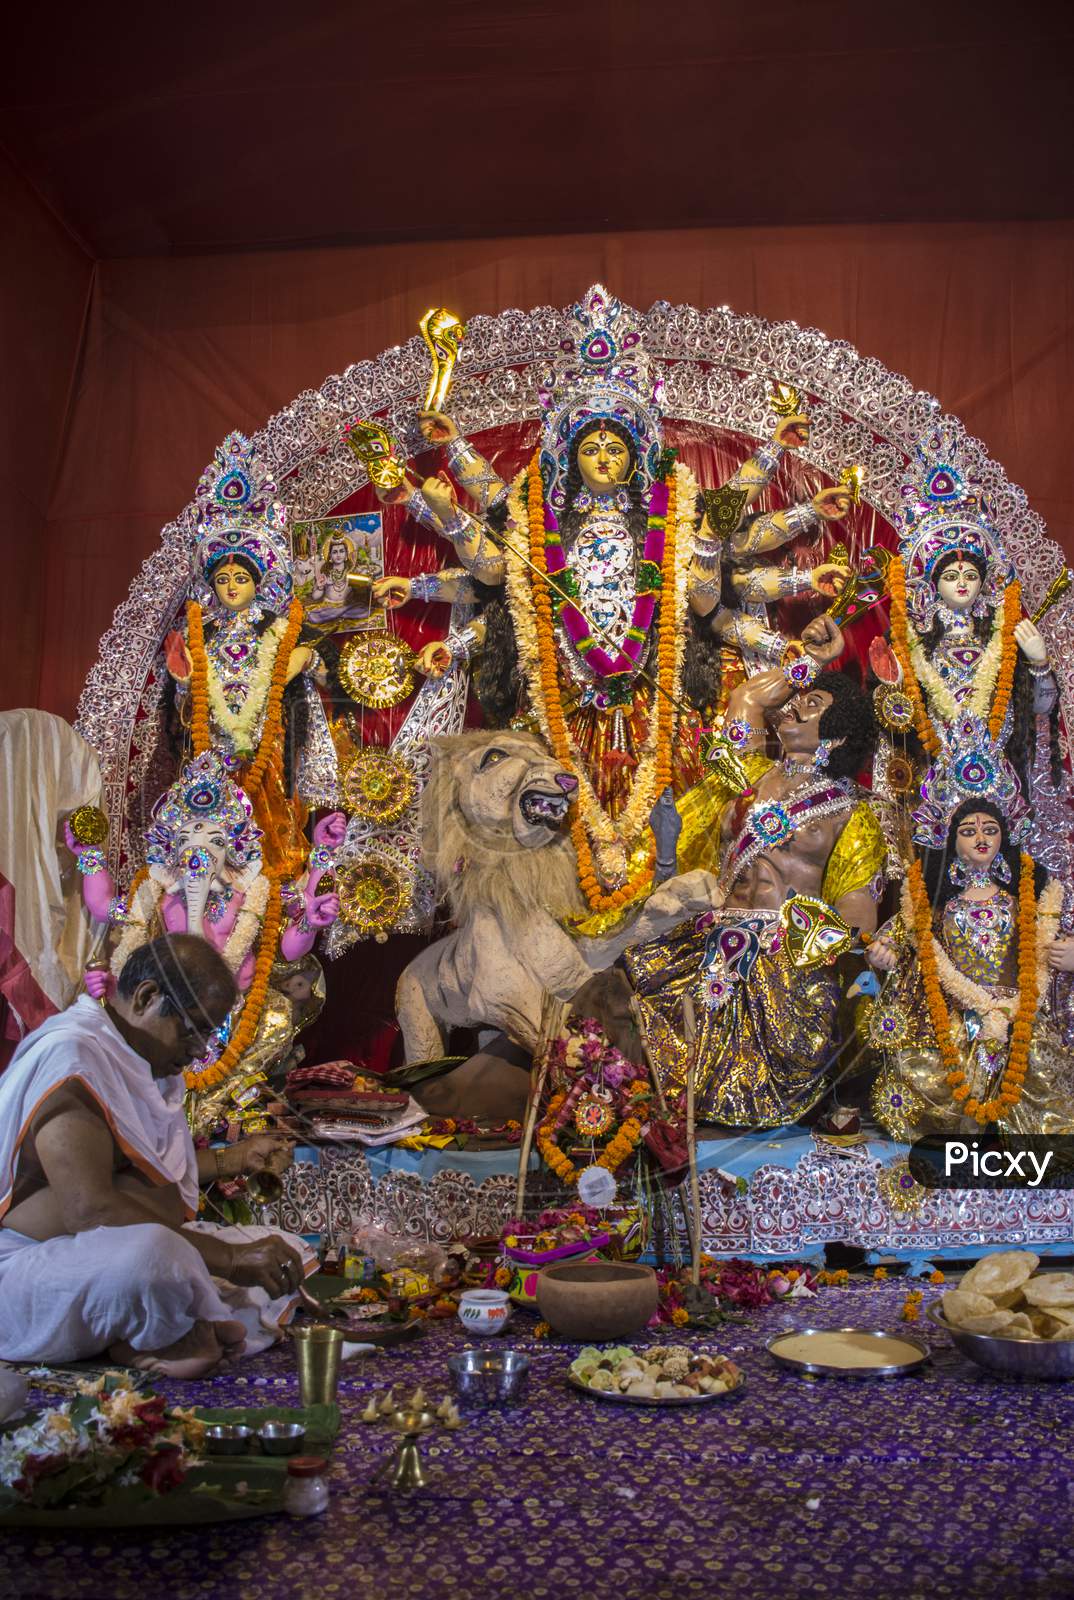 Goddess Durga Idol In A Pandal. Durga Puja One Of The Most Important Worldwide Hindu Festival Specially For Bengalies.